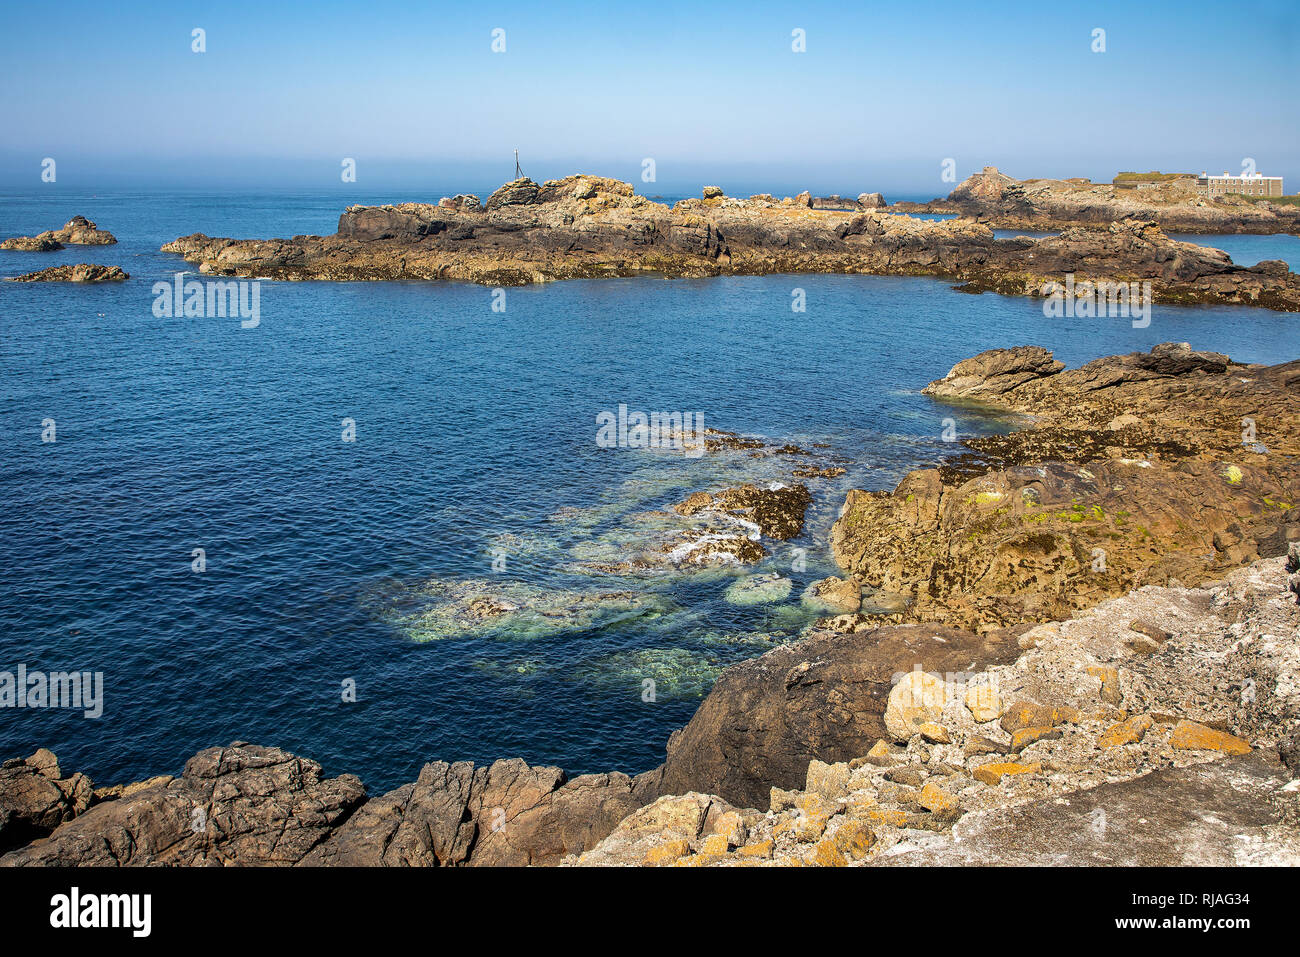 View looking north east from Bibette Head, Alderney, channel islands, showing clear blue seawater. Stock Photo